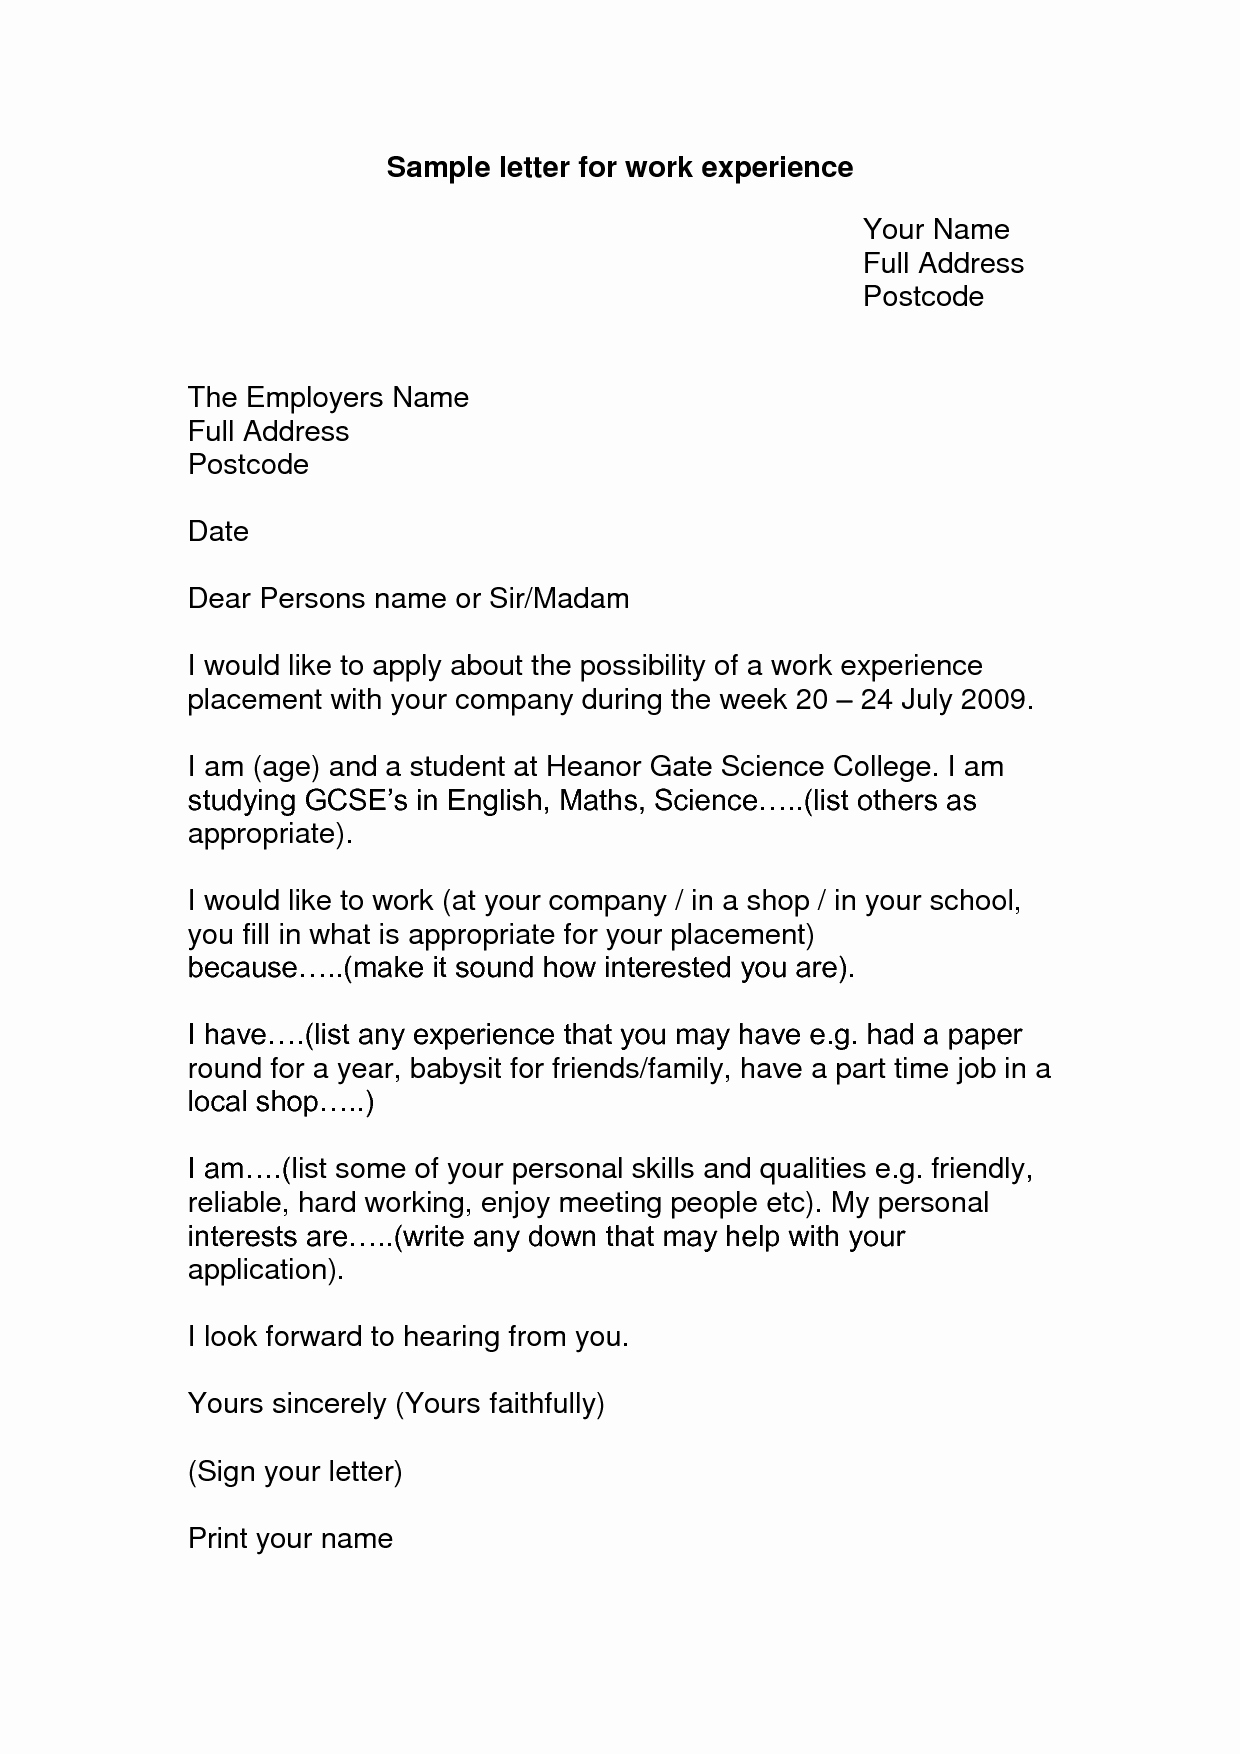 I140 Experience Letter format Best Of Work Experience Letter Example Google Search